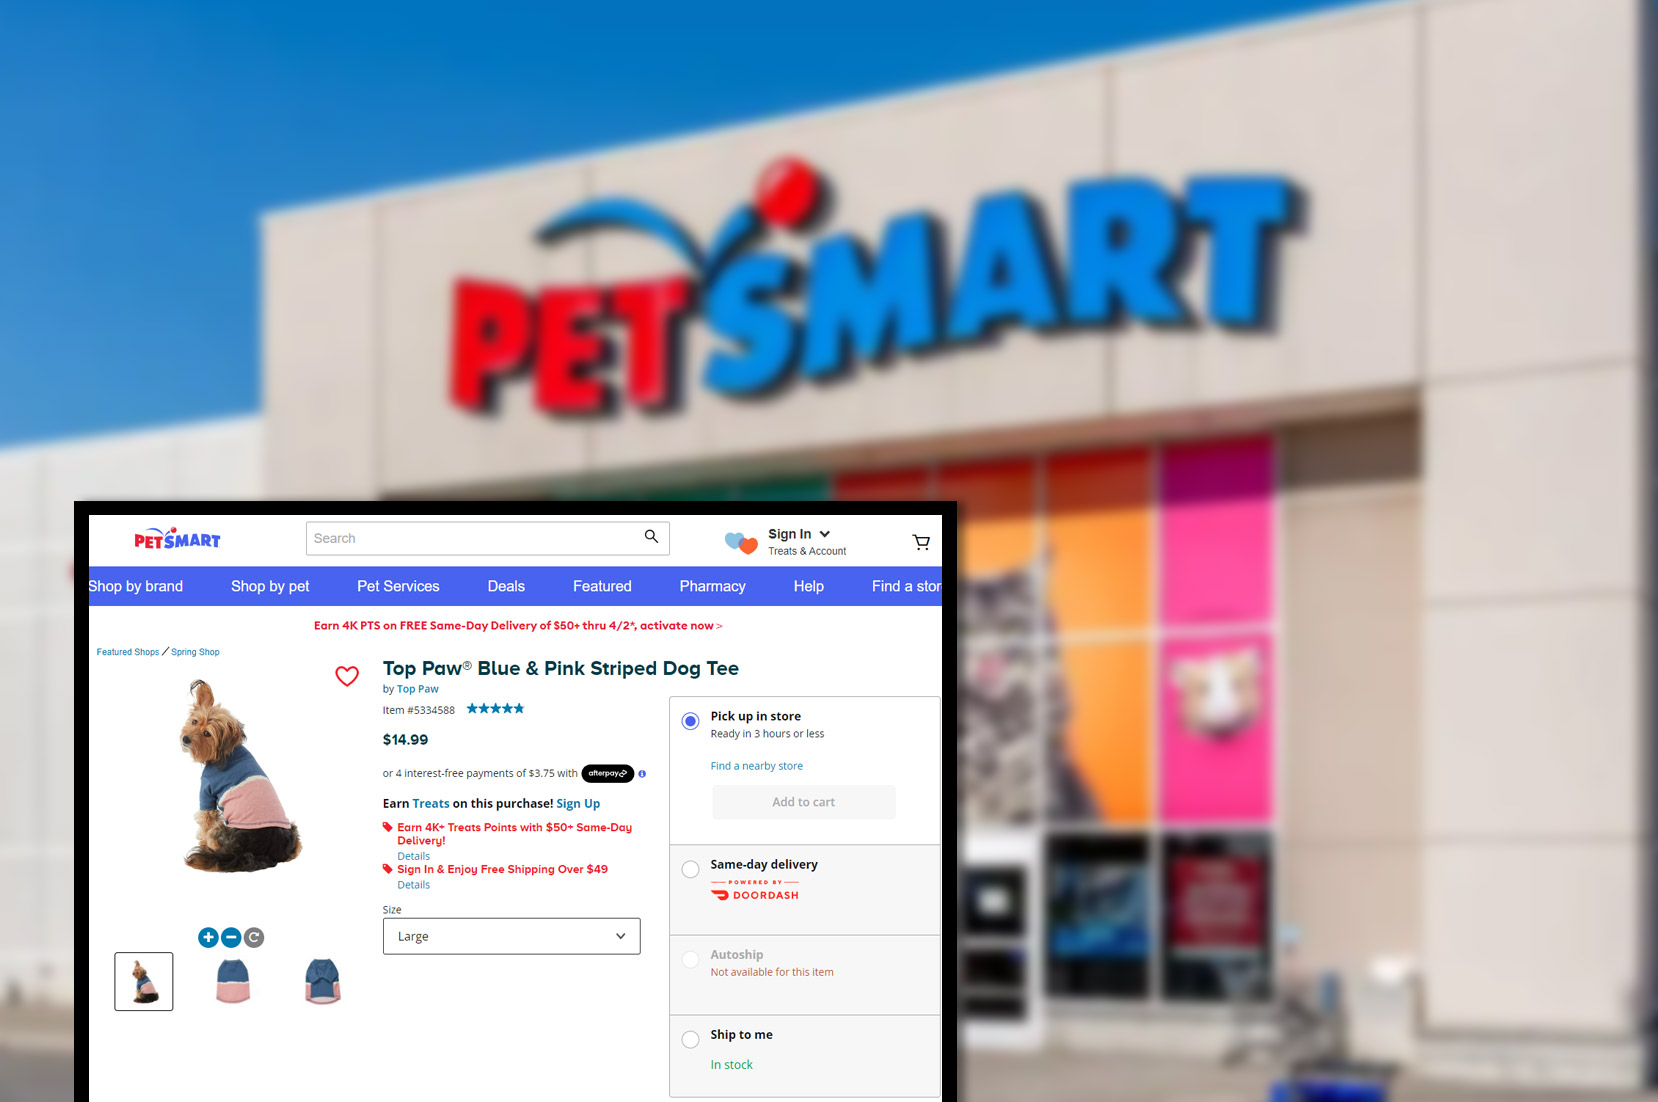 petsmart-comproduct-pricing-information-and-image-scraping-services